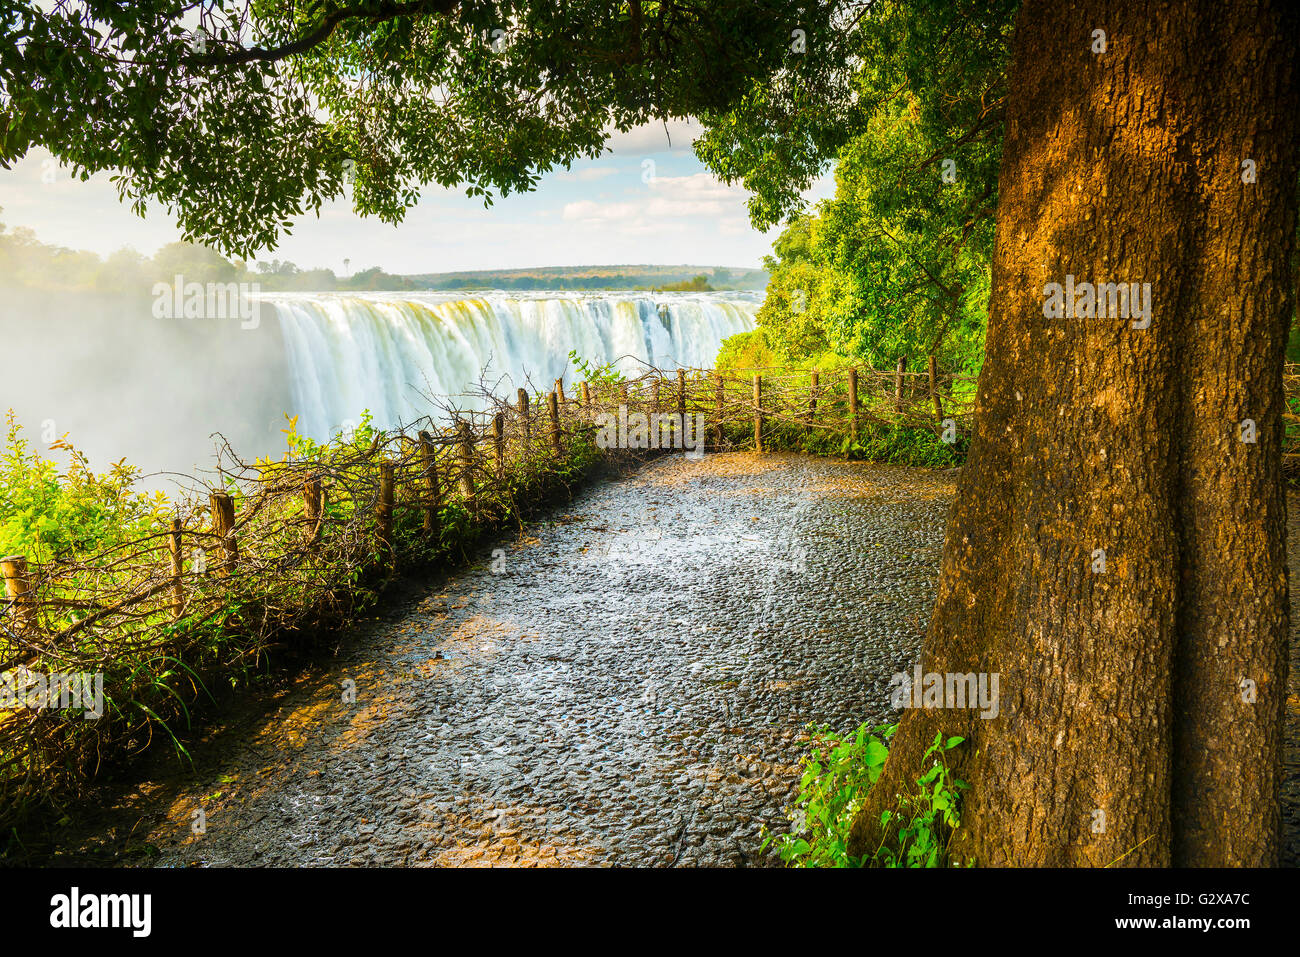 Victoria Falls waterfall in Africa, between Zambia and Zimbabwe, one of the seven wonders of the world Stock Photo